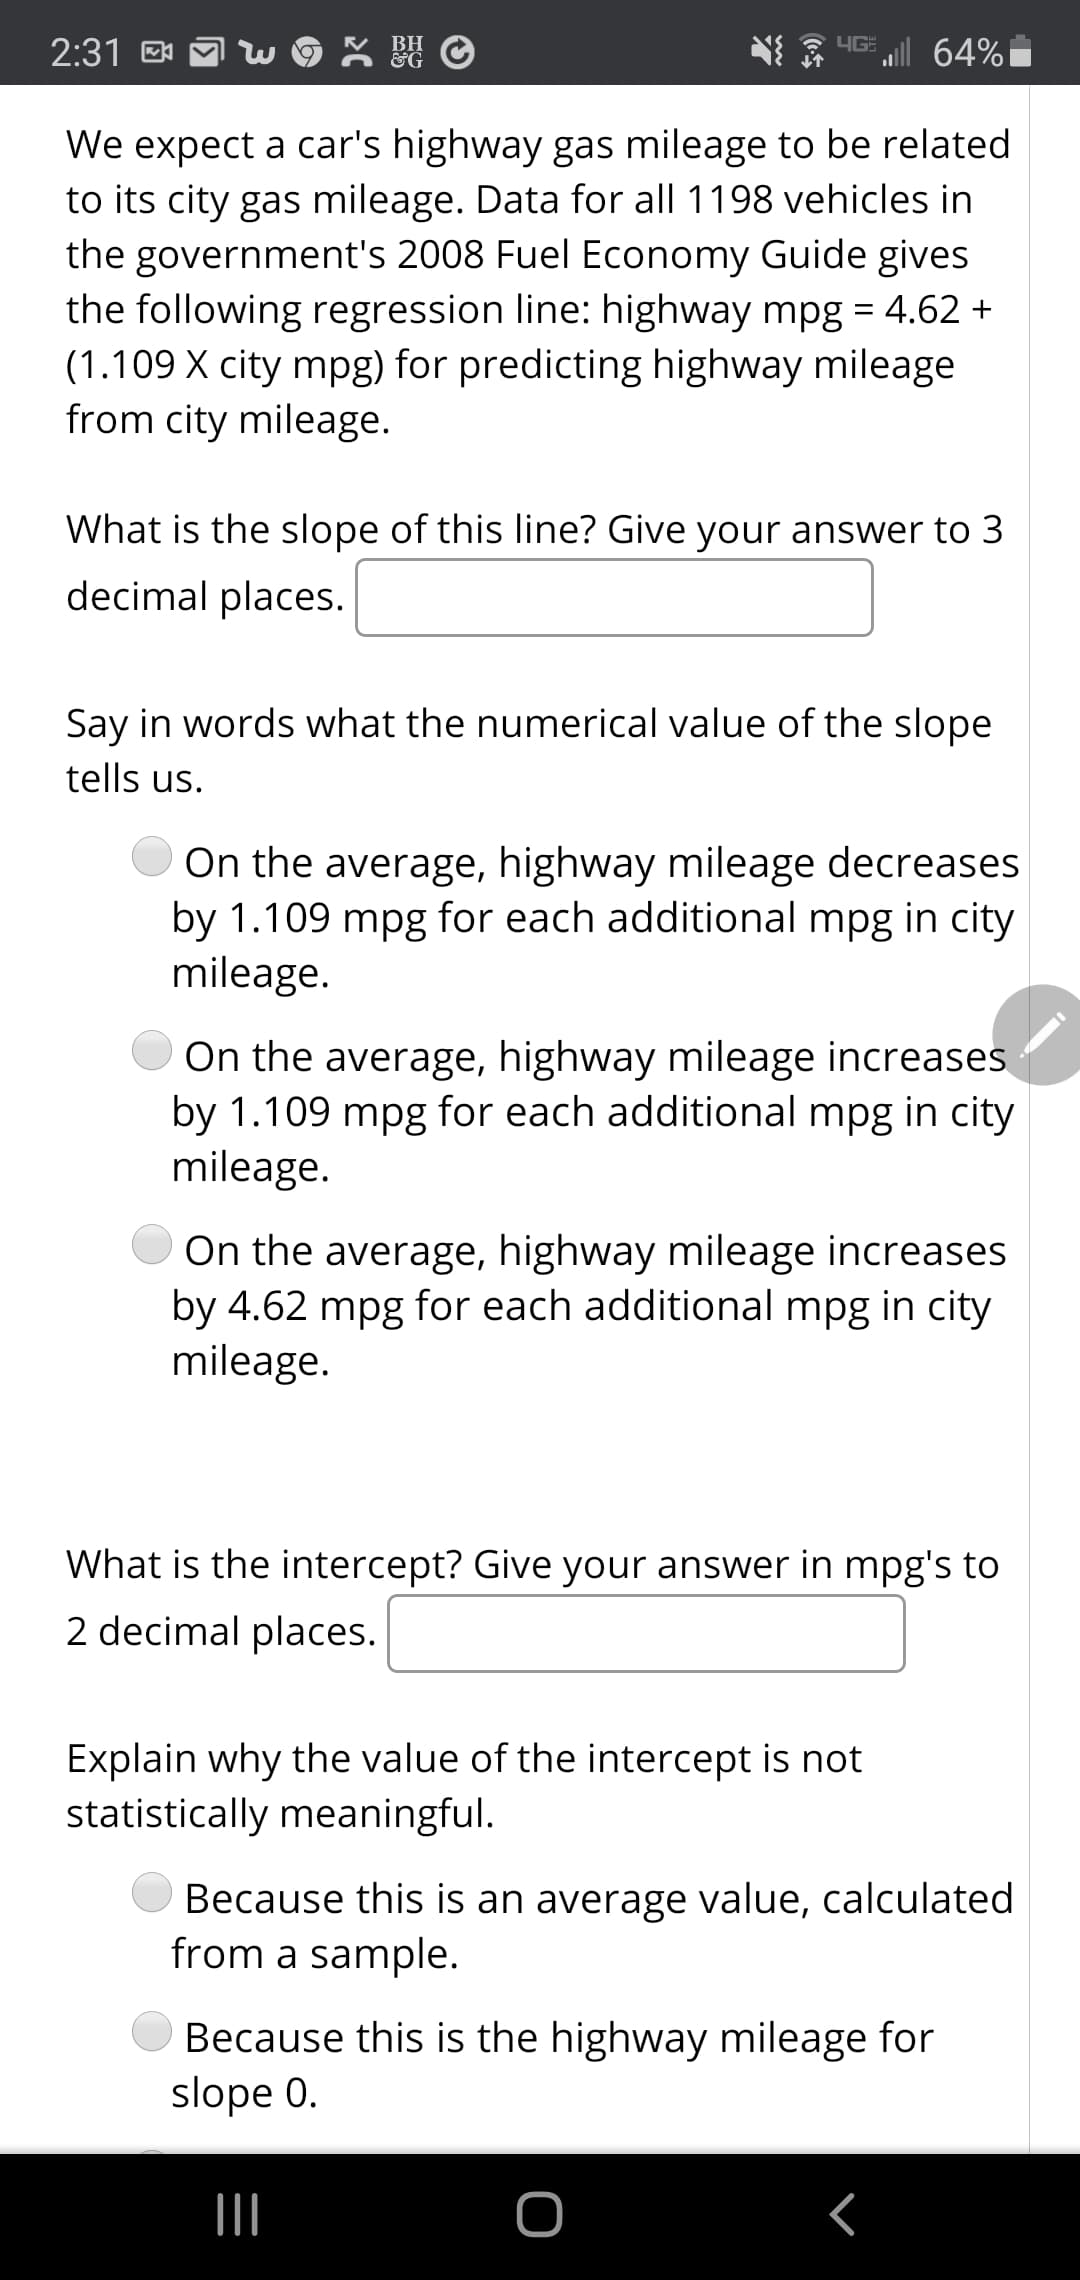 We expect a car's highway gas mileage to be related
to its city gas mileage. Data for all 1198 vehicles in
the government's 2008 Fuel Economy Guide gives
the following regression line: highway mpg = 4.62 +
(1.109 X city mpg) for predicting highway mileage
from city mileage.
What is the slope of this Iline? Give your answer to 3
